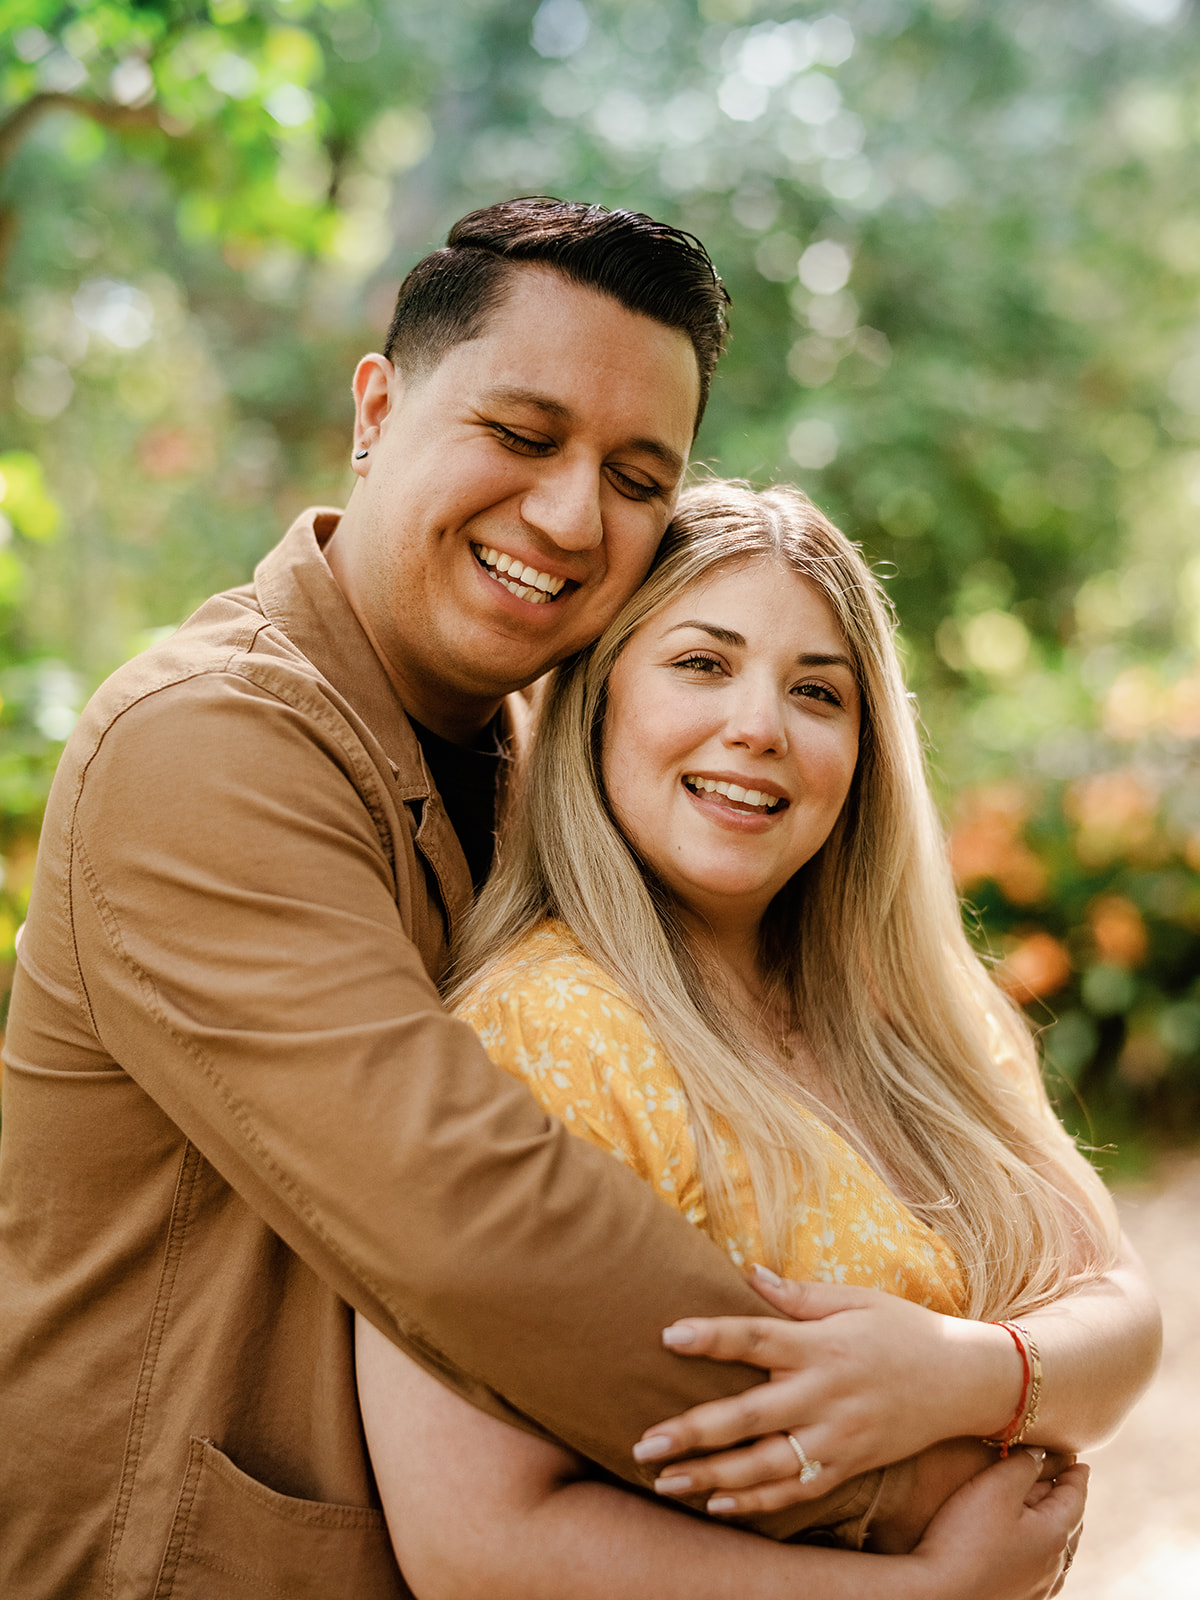 Proposal & Engagement Session - Descanso Gardens - Glendale, California - Outdoor Portraits